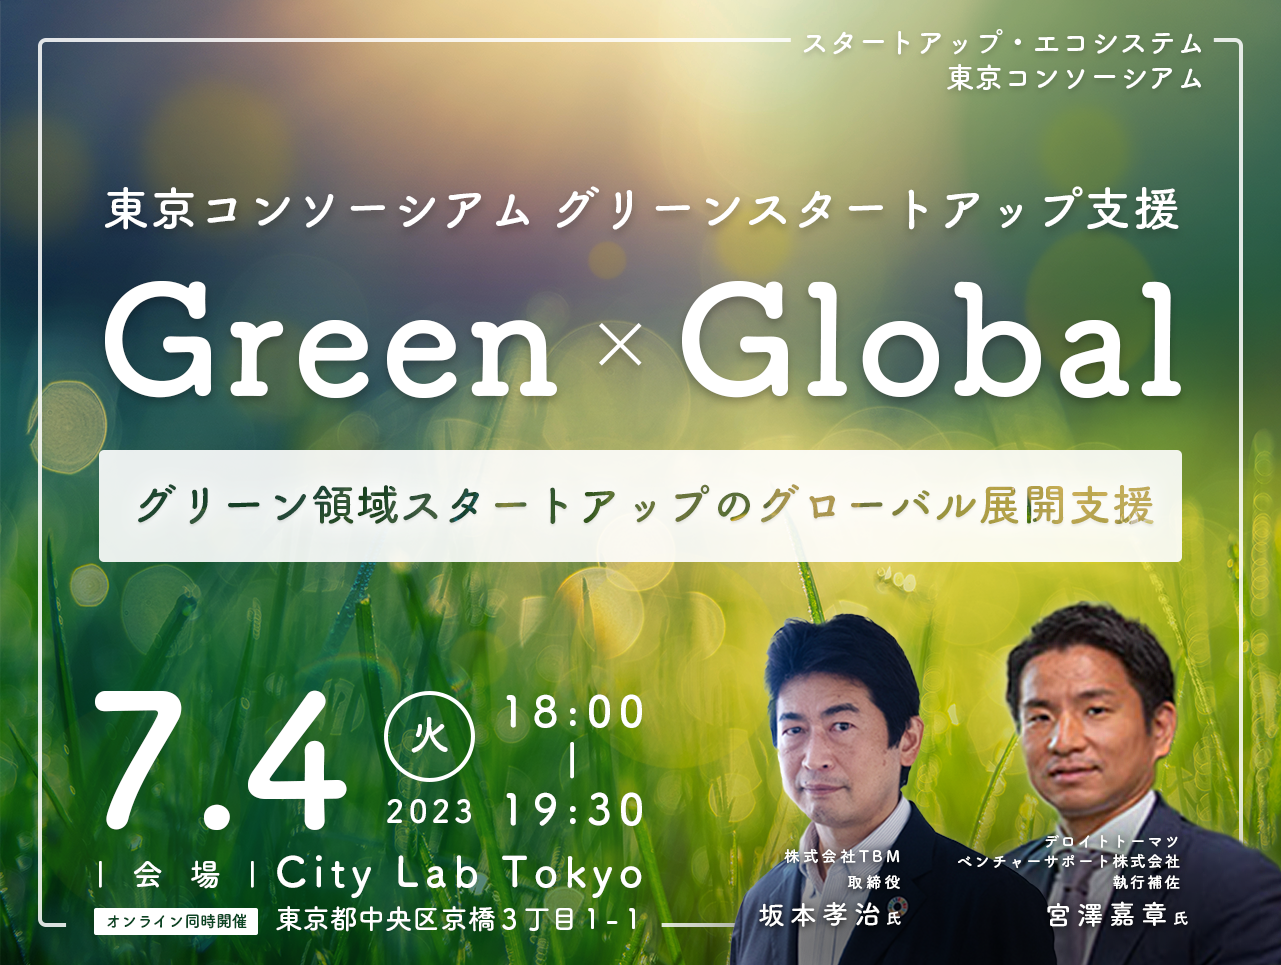 Tokyo Consortium Green Startup Support Green x Global ~Global expansion support for green domain startups~